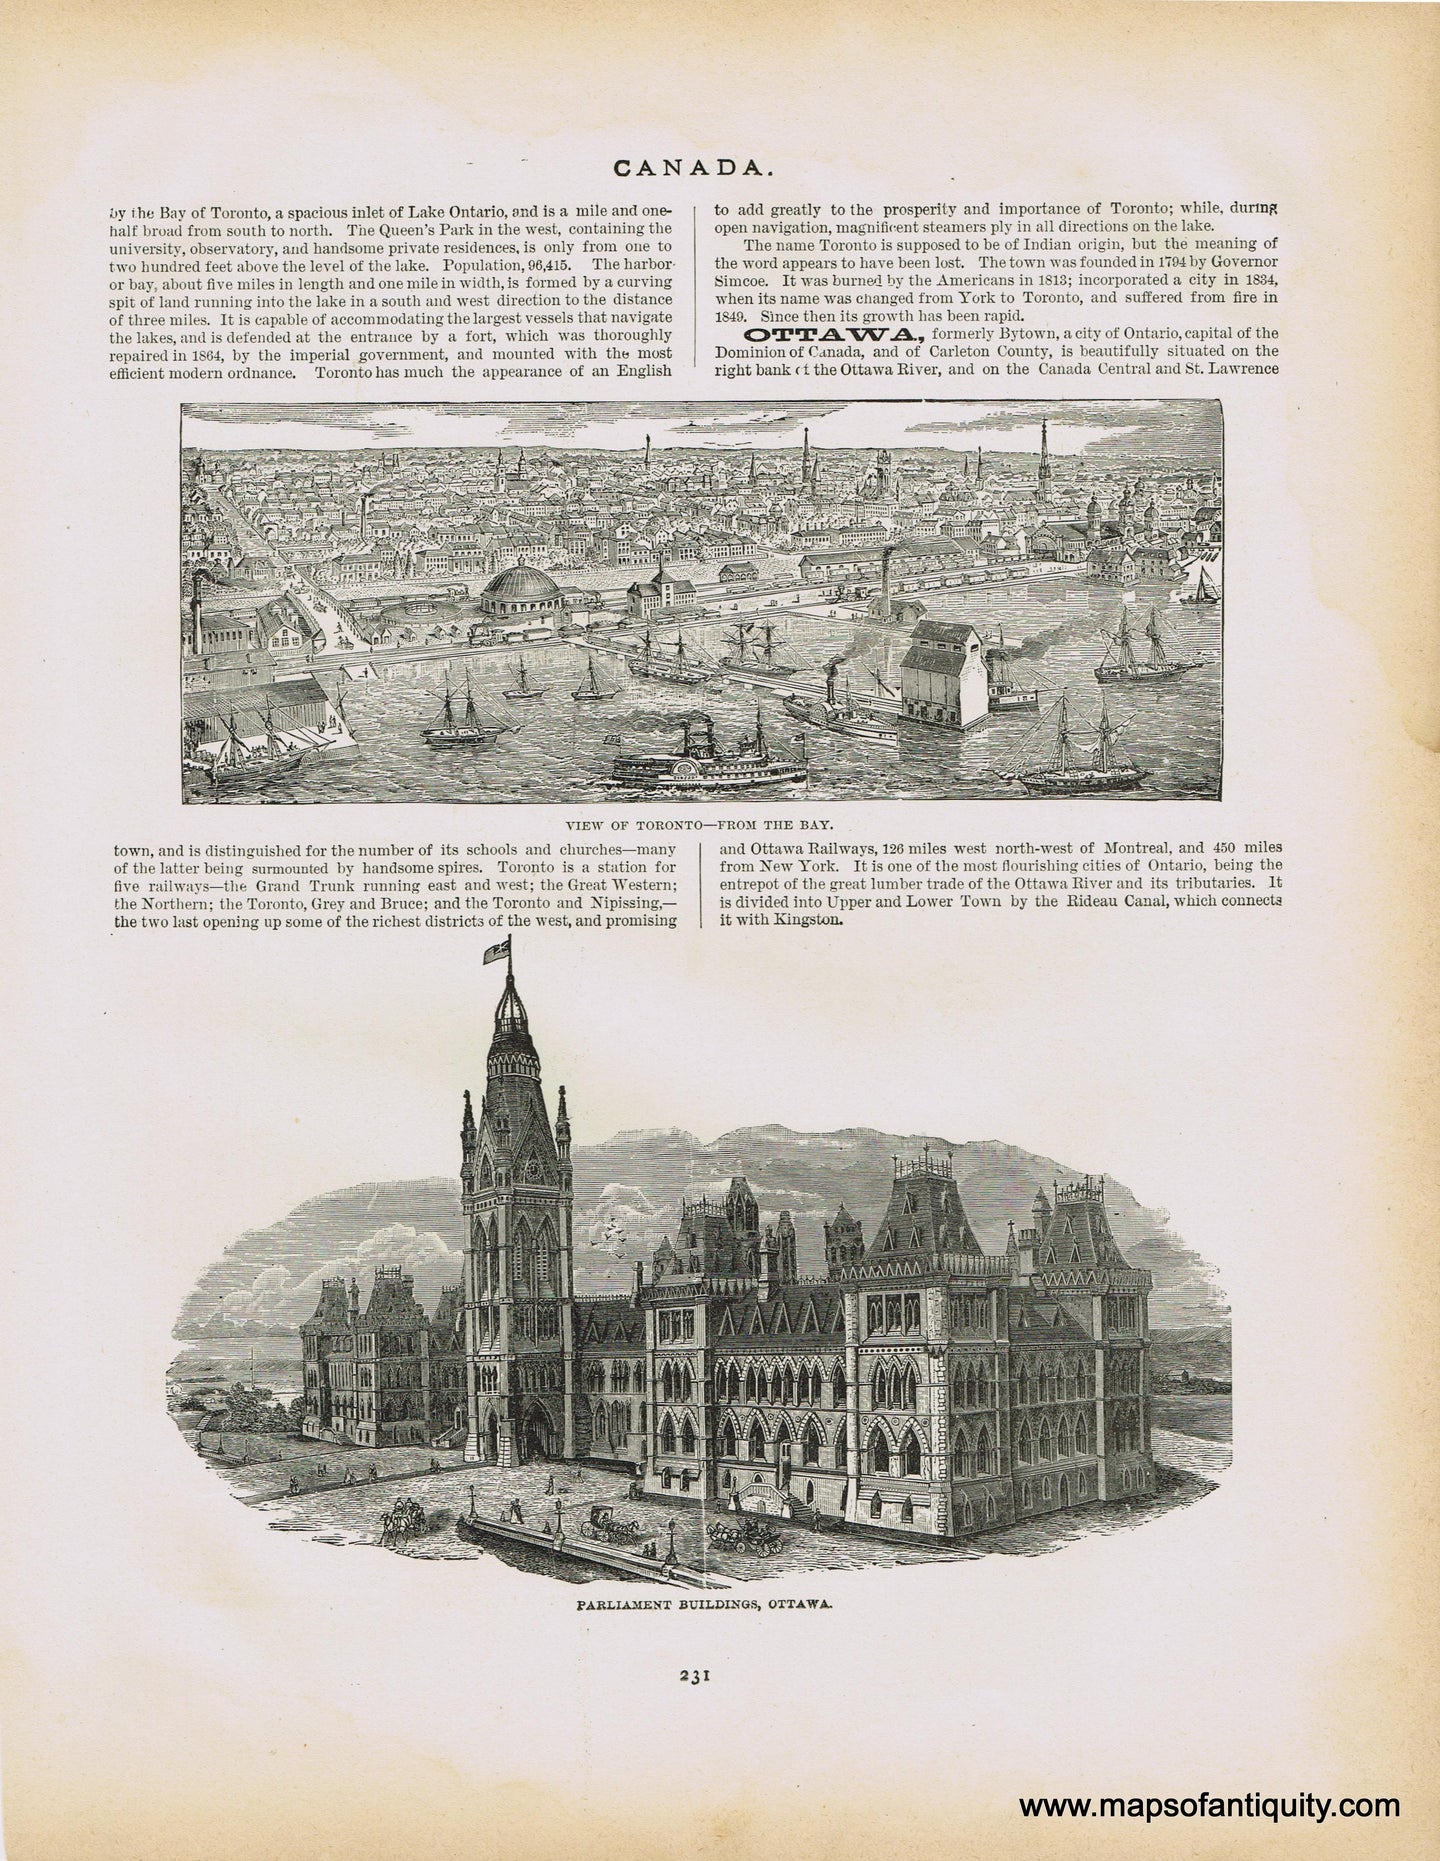 Genuine-Antique-Print-View-of-Toronto-from-The-Bay-Parliament-Buildings-Ottowa-1890-Publication-Unknown-Maps-Of-Antiquity